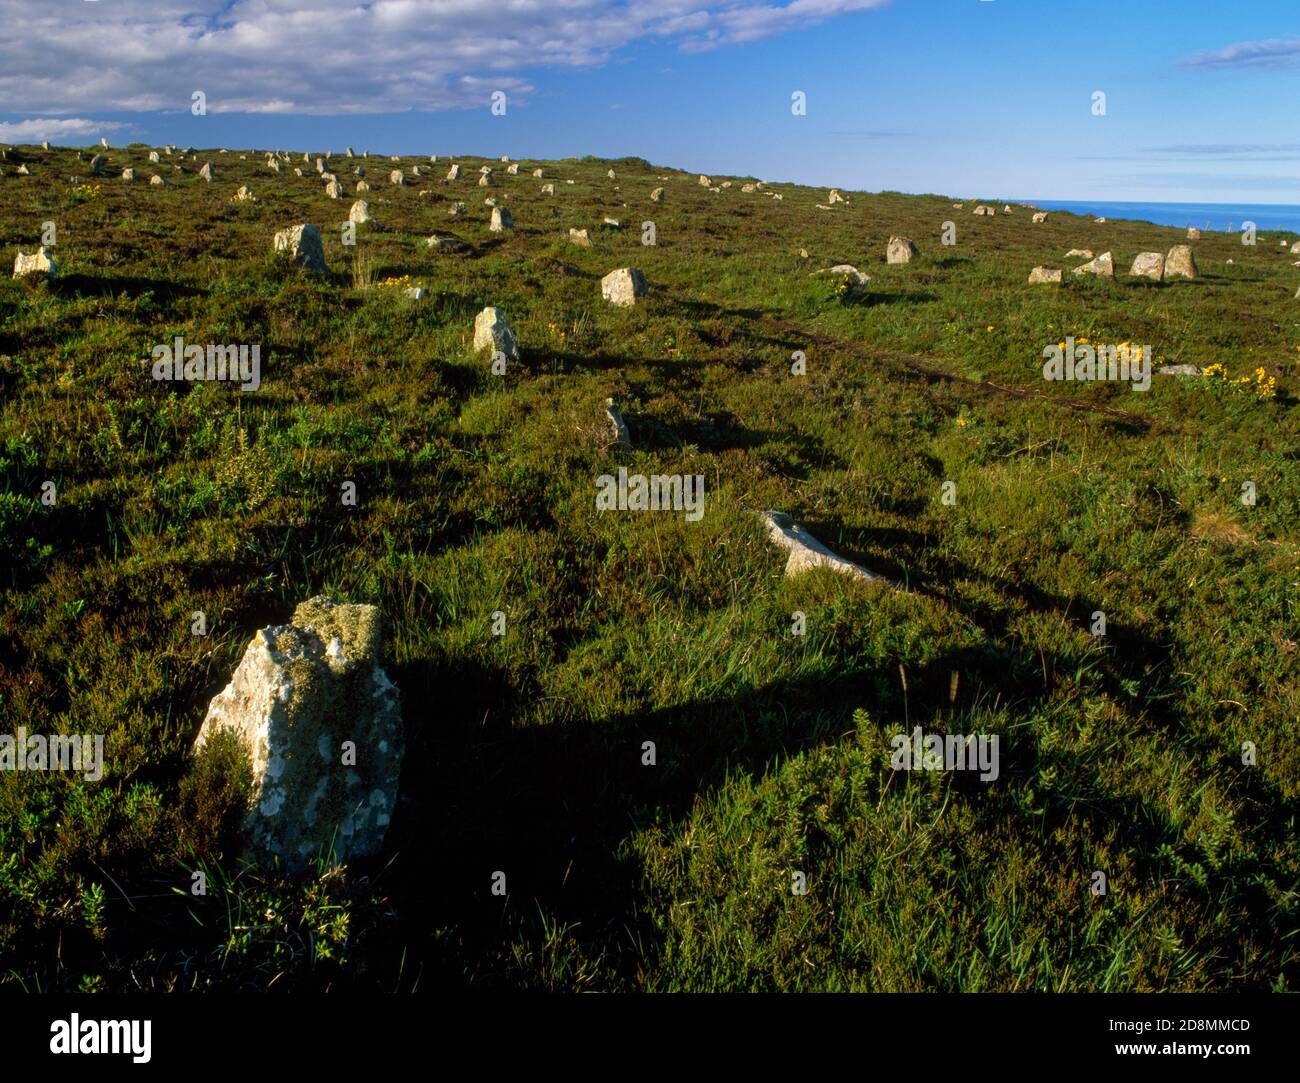 Looking NE uphill at Mid Clyth stone rows, Caithness, Scotland, UK: c 200 stones in 22+ rows forming 2 fan patterns running N-S on a S-facing slope. Stock Photo